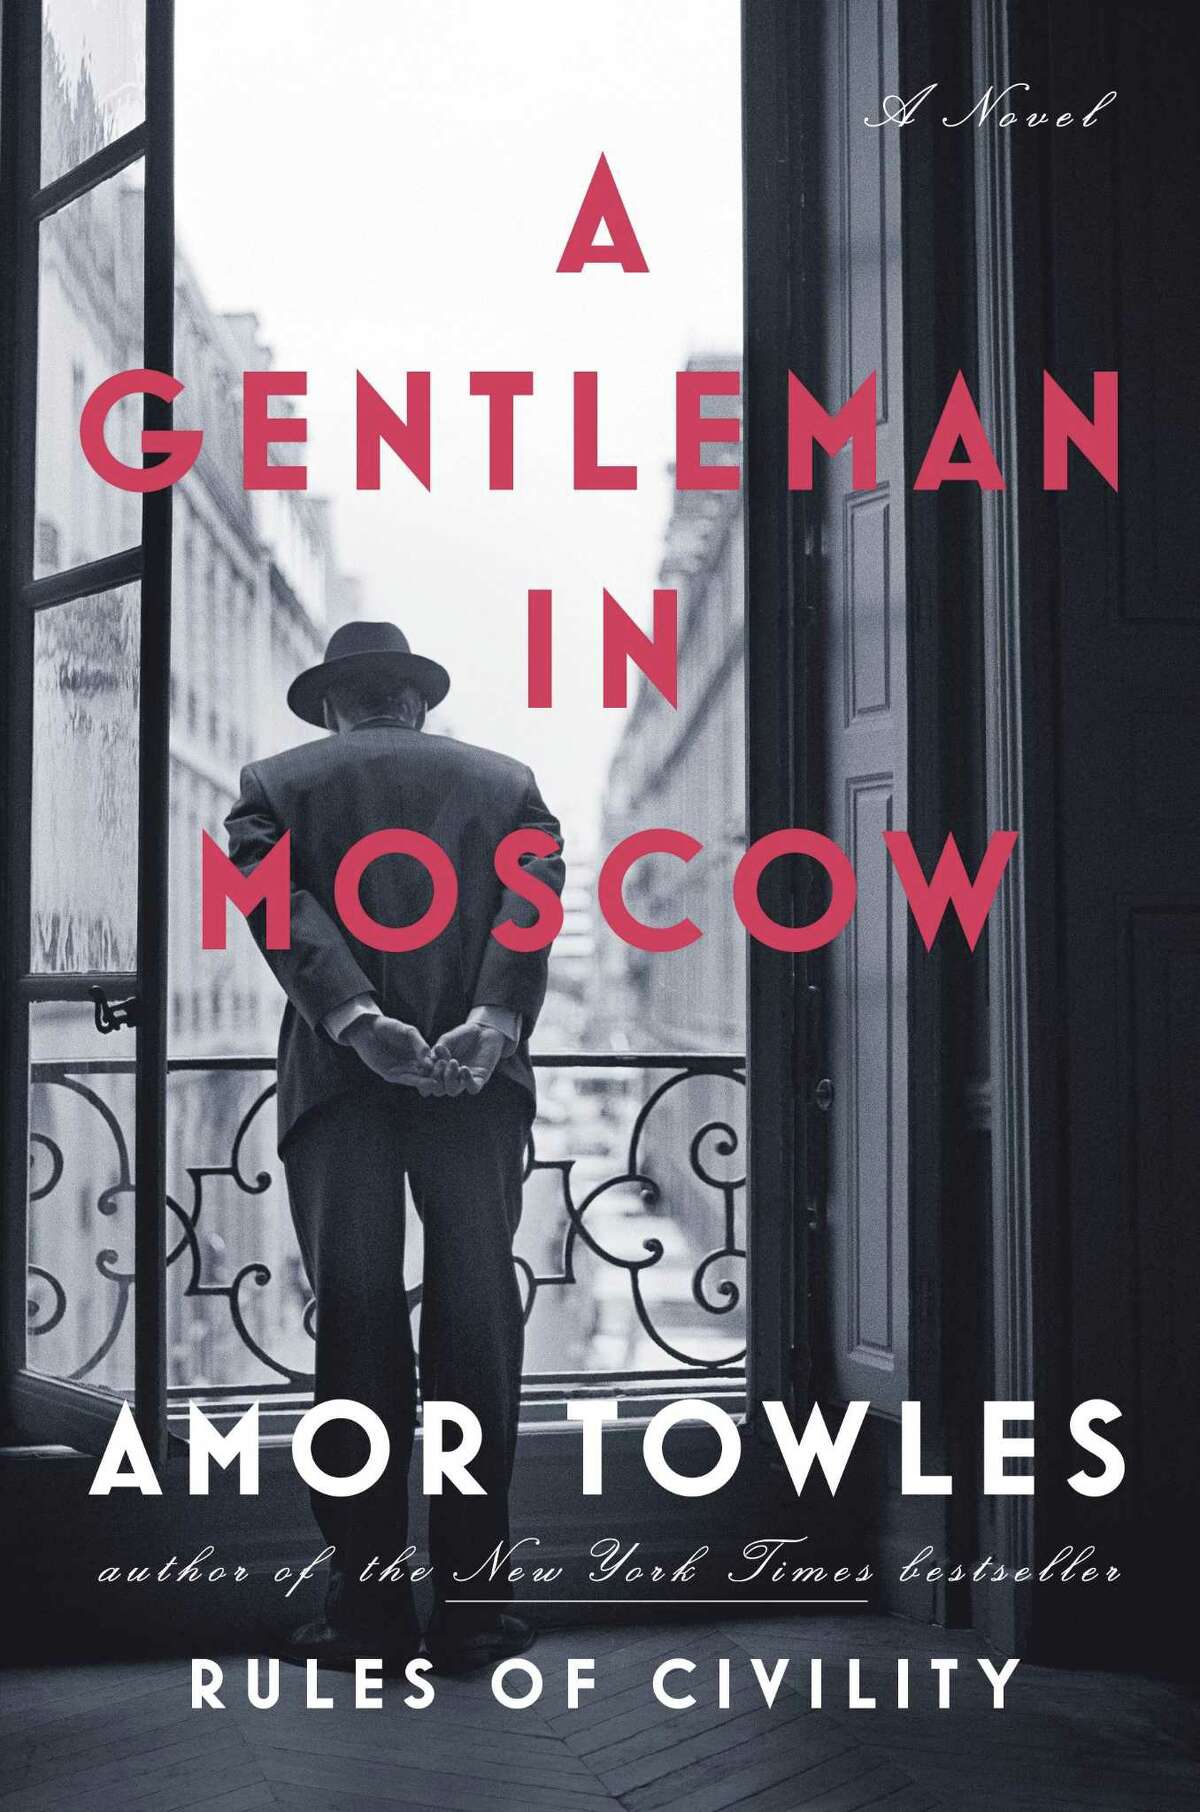 Amor Towles second novel “A Gentleman in Moscow” is set in the famous Metropol Hotel in Moscow.